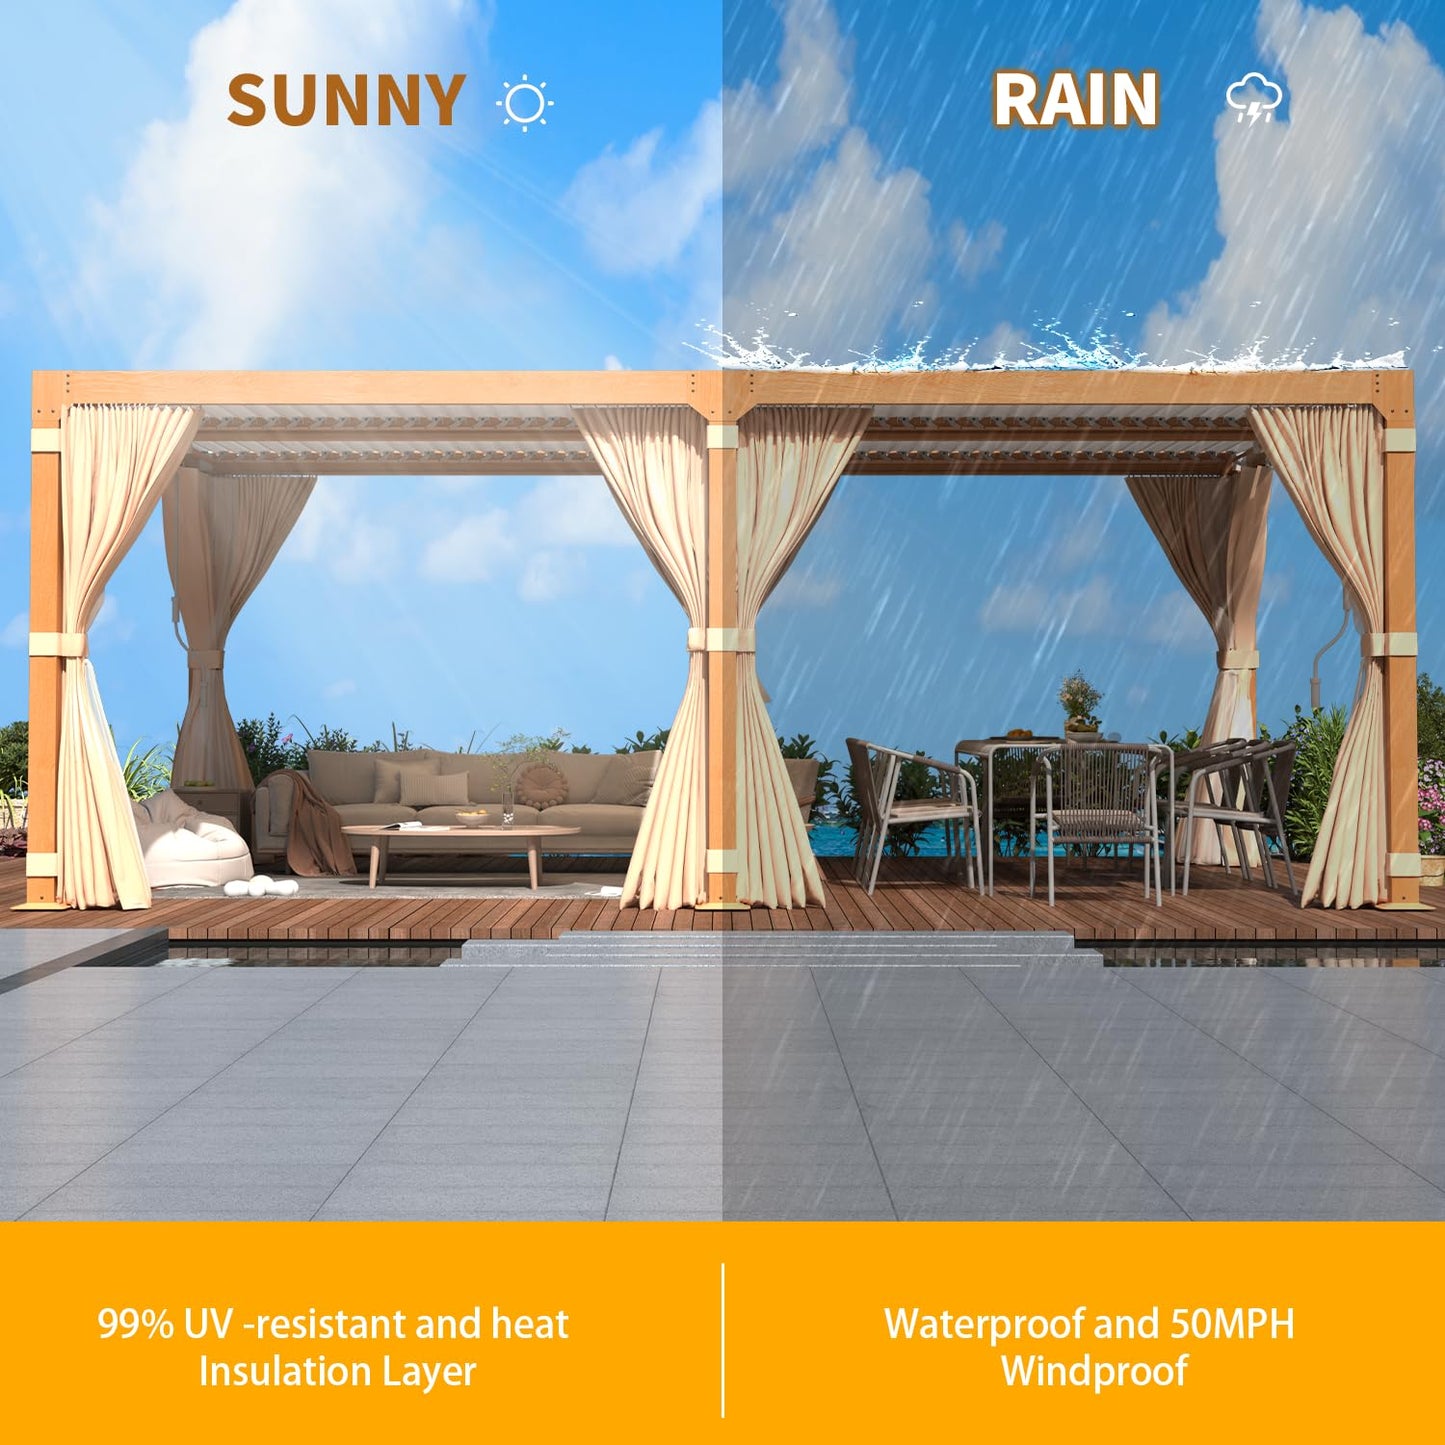 YOLENY 12 x 20 FT Louvered Pergola, Wood Grain Pergola with Adjustable Aluminum Waterproof Roof, Sun Shade Shelter with Netting and Curtains for